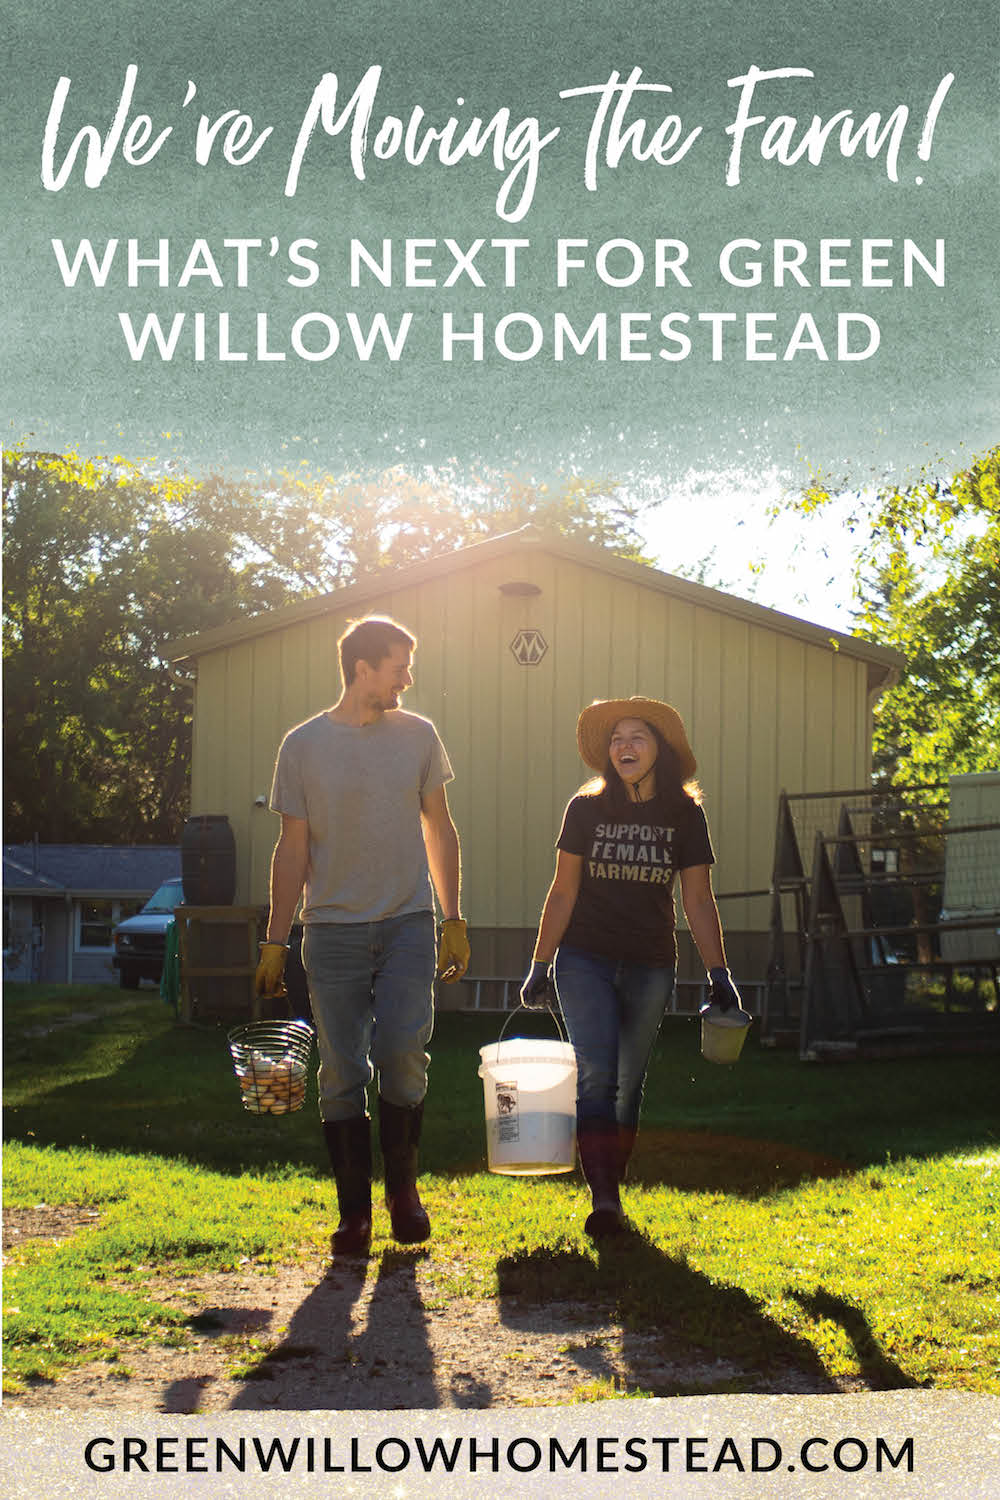 We are moving the farm and what's next for Green Willow Homestead